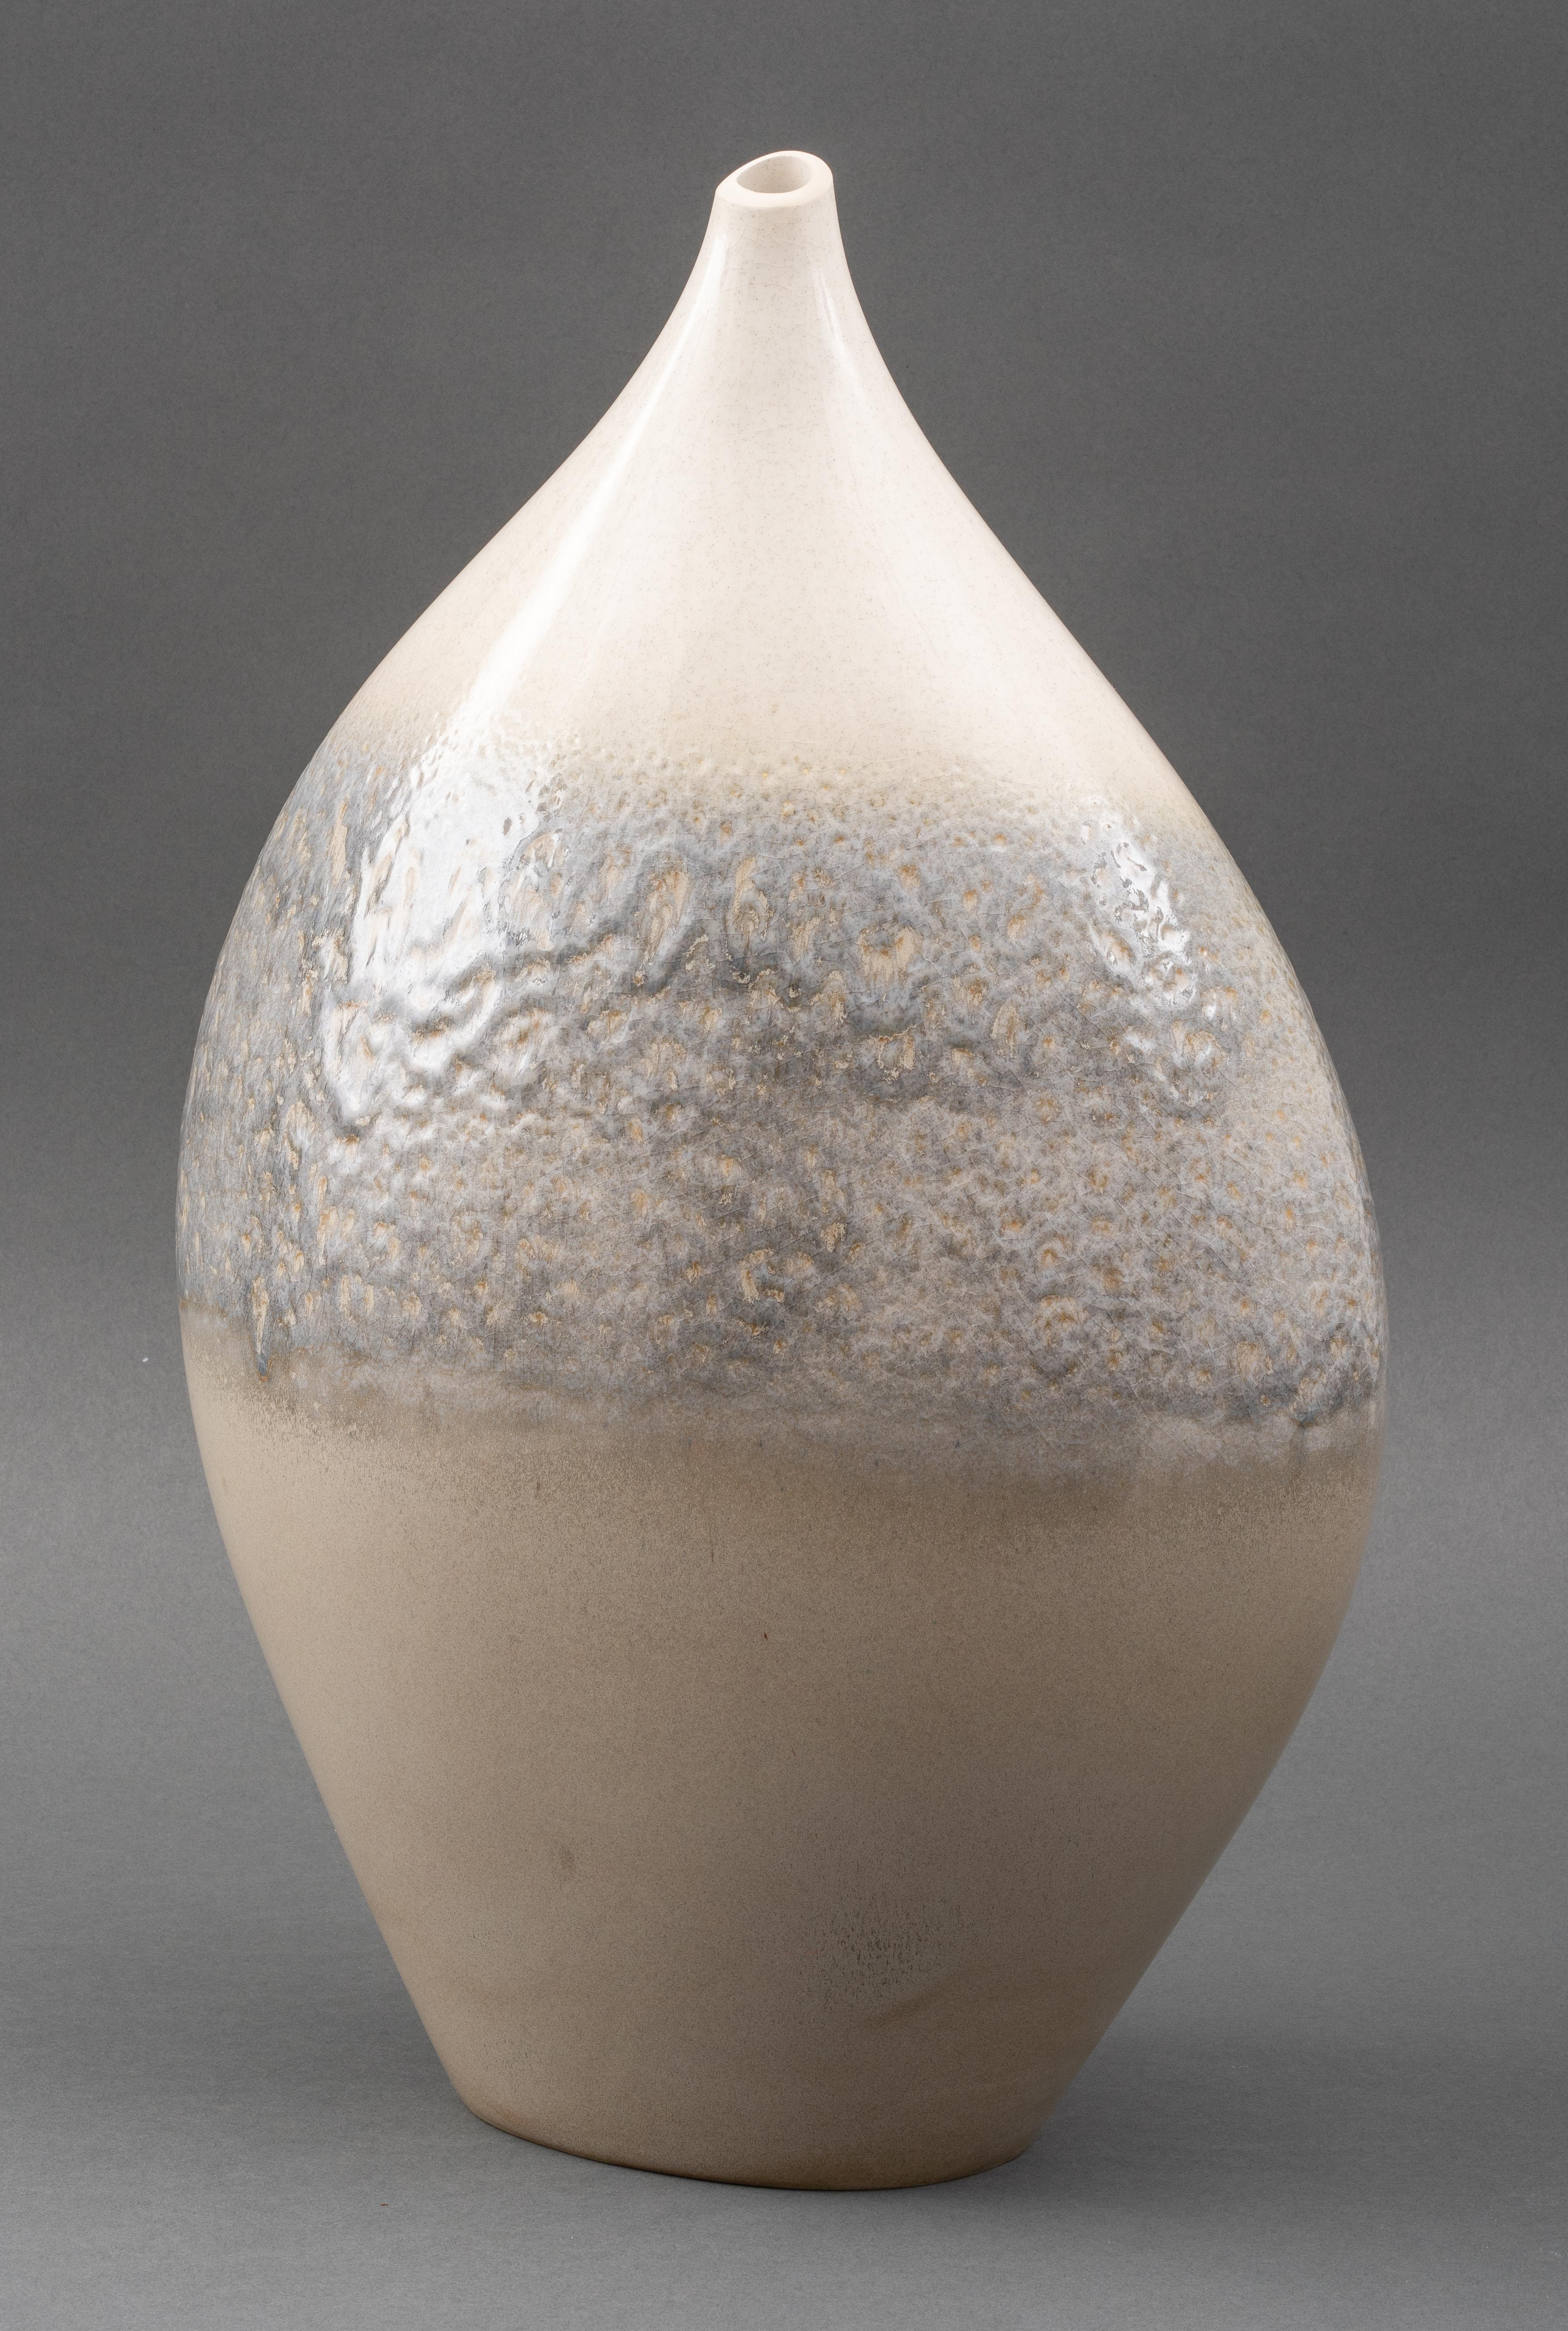 Modernist glazed ceramic vase, possibly Spanish or Portuguese, with ombre textured glazes in creams and grays. 
Measures: 20.5